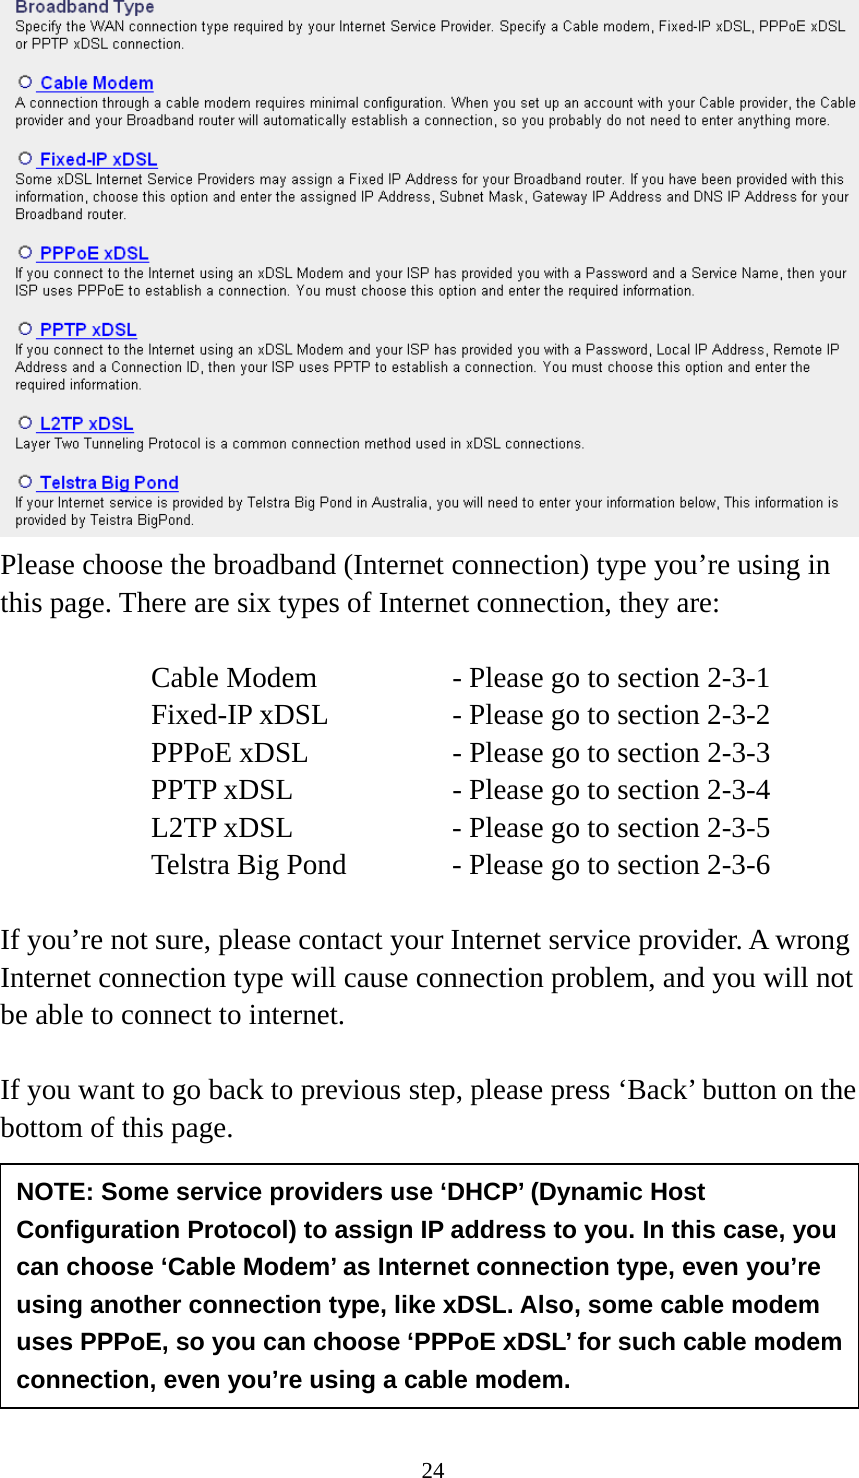 24  Please choose the broadband (Internet connection) type you’re using in this page. There are six types of Internet connection, they are:  Cable Modem      - Please go to section 2-3-1 Fixed-IP xDSL      - Please go to section 2-3-2 PPPoE xDSL      - Please go to section 2-3-3 PPTP xDSL       - Please go to section 2-3-4 L2TP xDSL       - Please go to section 2-3-5 Telstra Big Pond     - Please go to section 2-3-6  If you’re not sure, please contact your Internet service provider. A wrong Internet connection type will cause connection problem, and you will not be able to connect to internet.  If you want to go back to previous step, please press ‘Back’ button on the bottom of this page.      2-3-1 Setup procedure for ‘Cable Modem’:  NOTE: Some service providers use ‘DHCP’ (Dynamic Host Configuration Protocol) to assign IP address to you. In this case, you can choose ‘Cable Modem’ as Internet connection type, even you’re using another connection type, like xDSL. Also, some cable modem uses PPPoE, so you can choose ‘PPPoE xDSL’ for such cable modem connection, even you’re using a cable modem. 